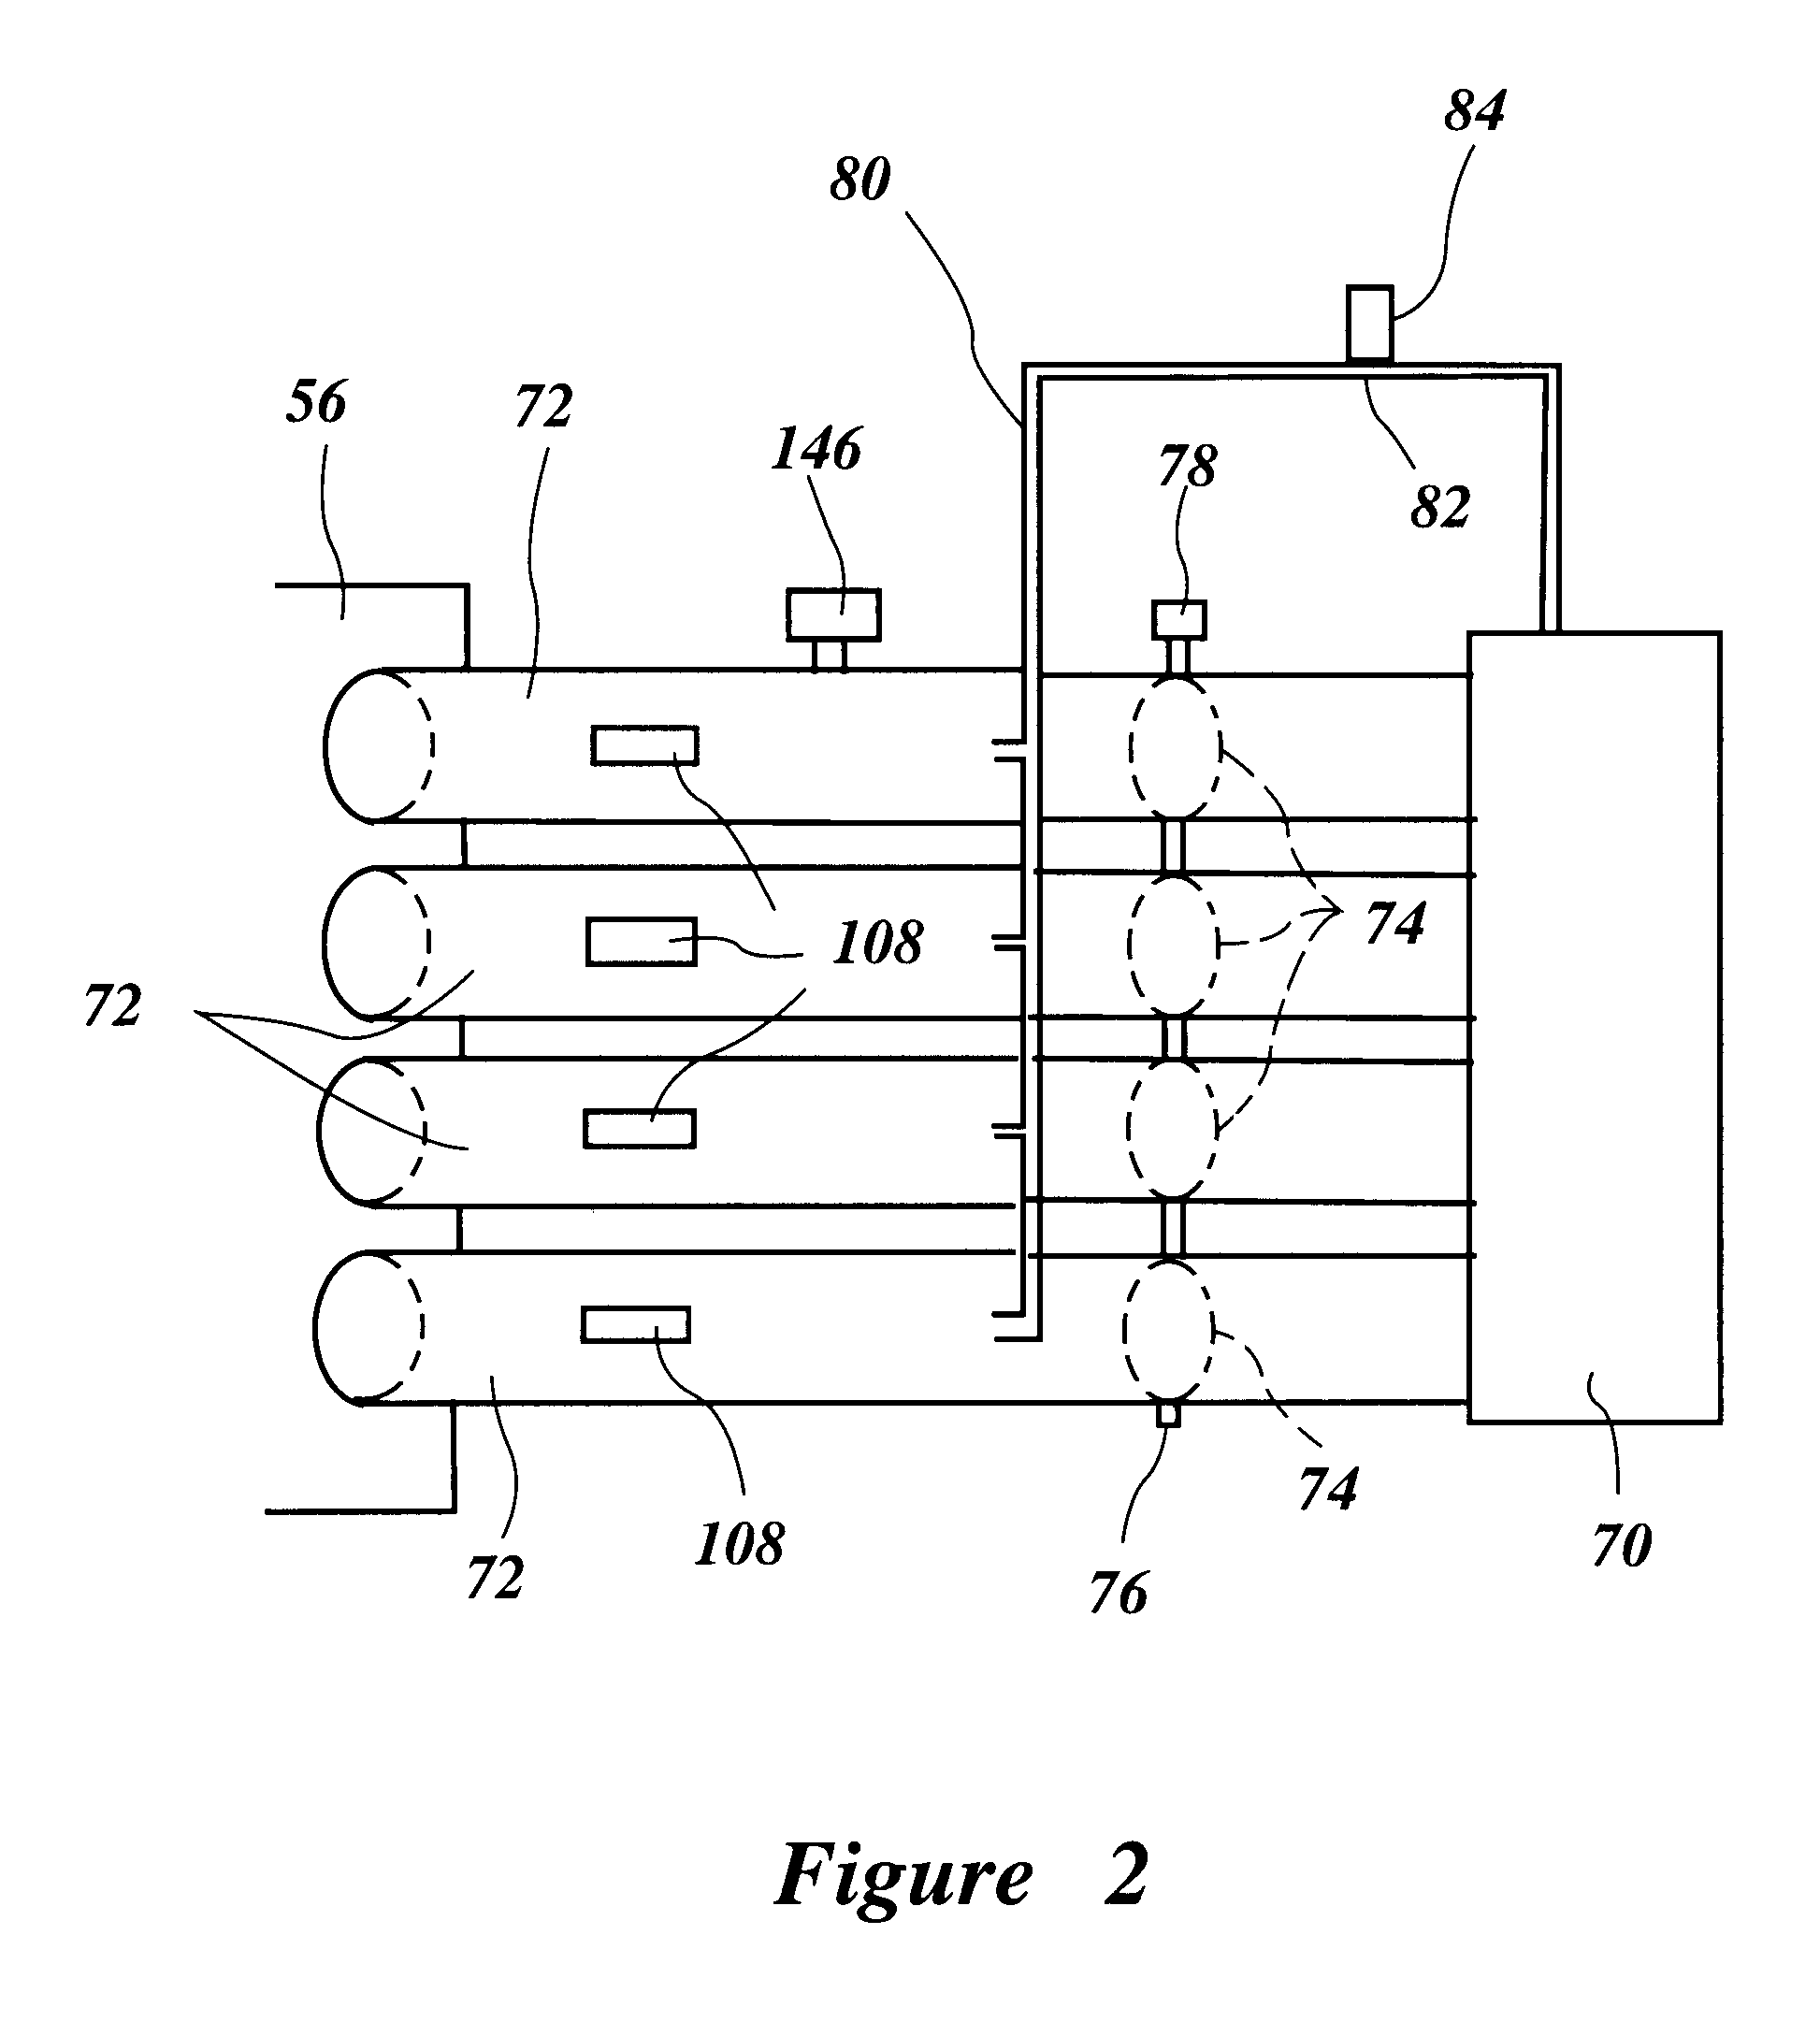 Idle speed control valve control system